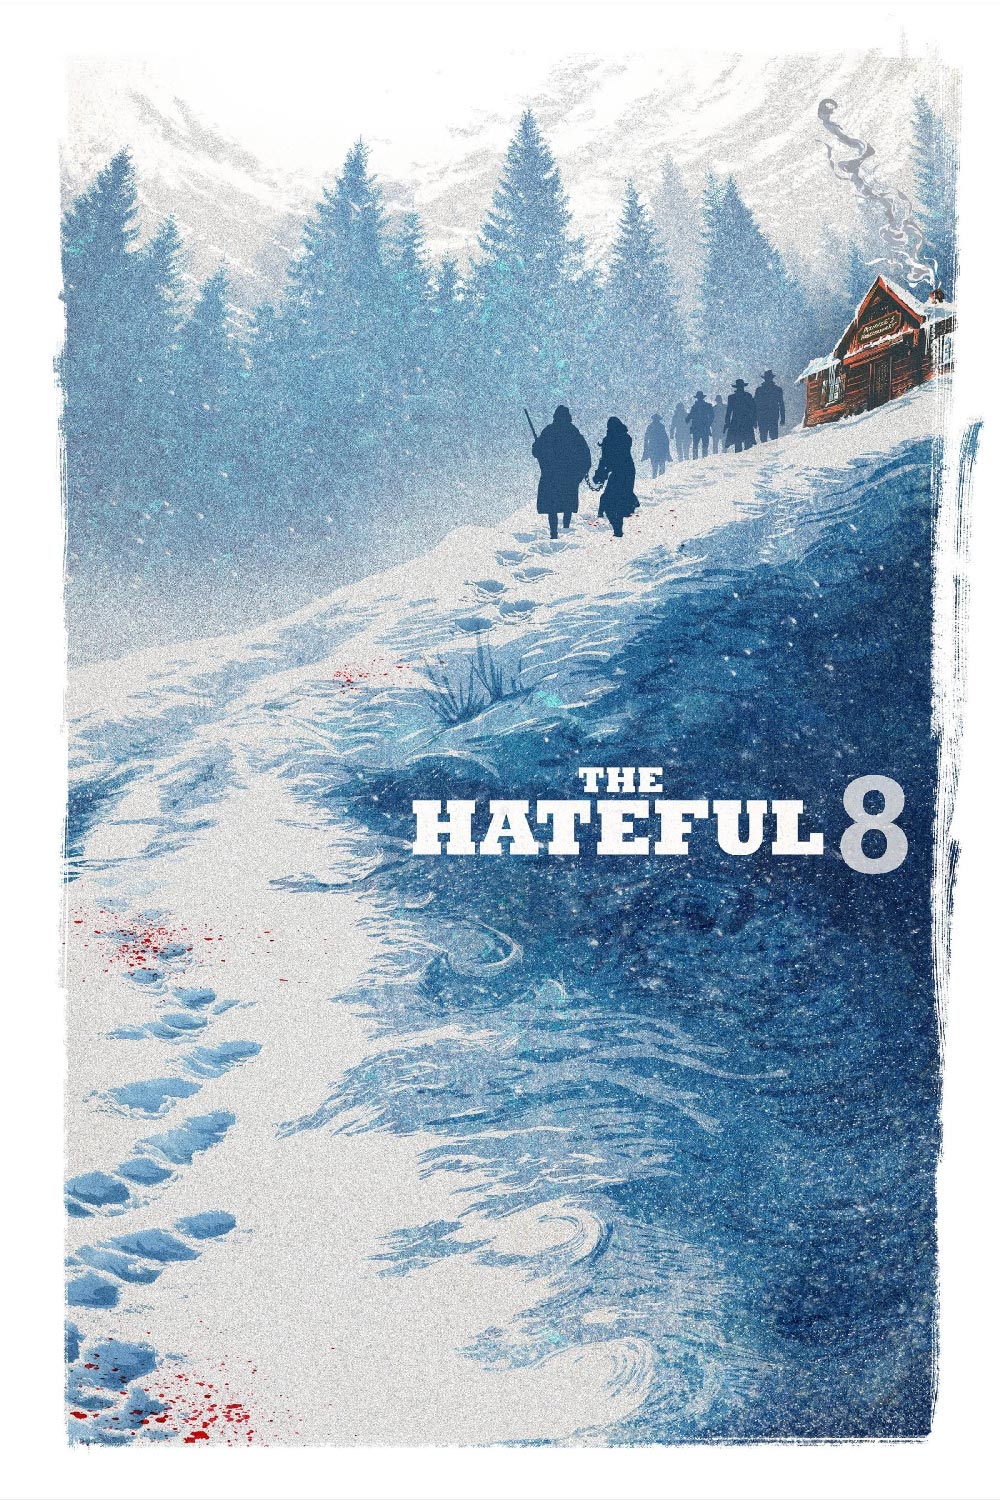 The Hateful Eight (2016) poster